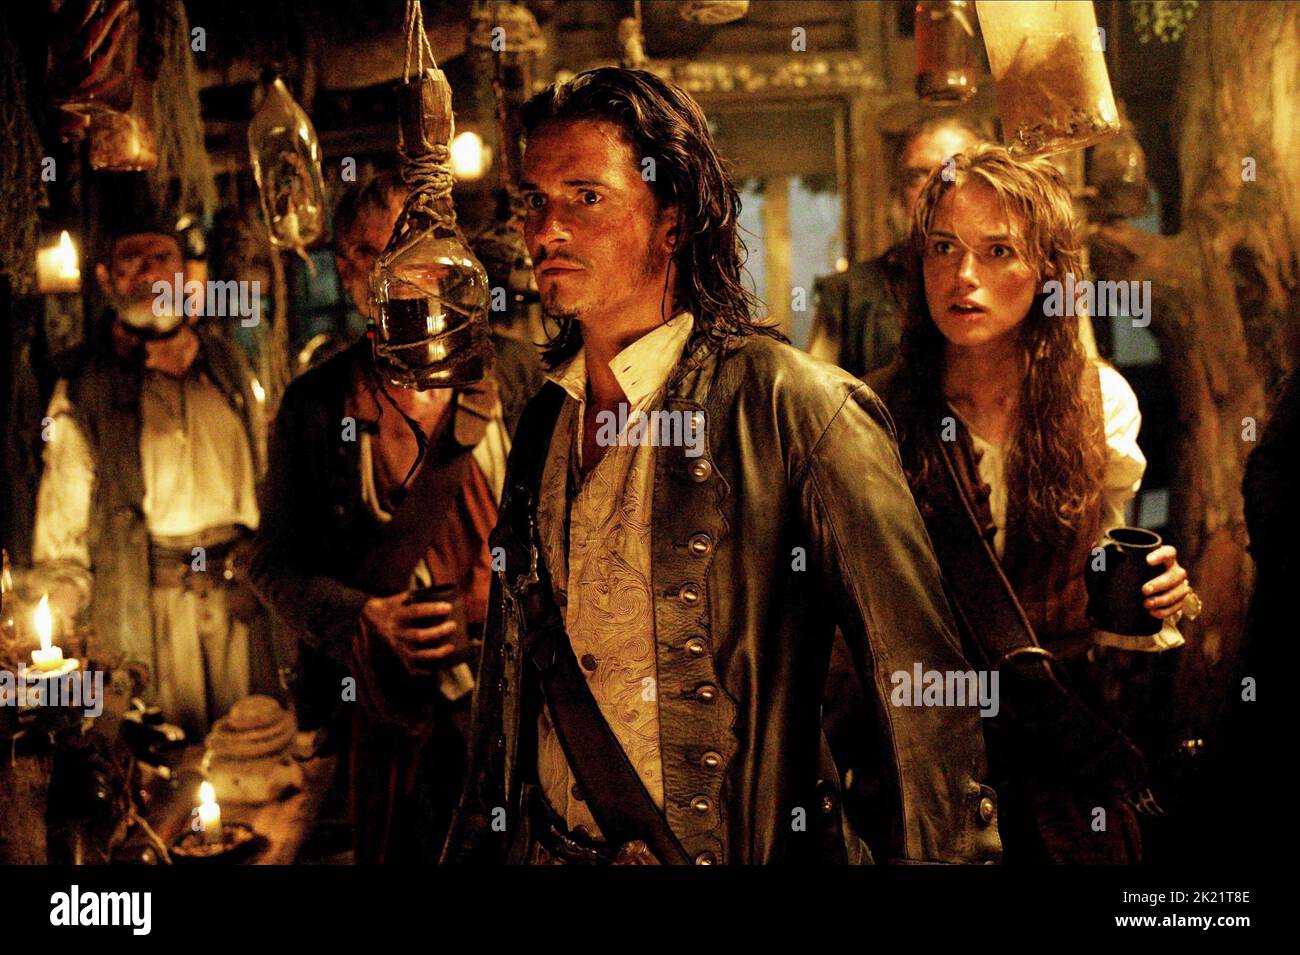 ORLANDO BLOOM, KEIRA KNIGHTLEY, PIRATES OF THE CARIBBEAN: DEAD MAN'S CHEST, 2006 Stock Photo